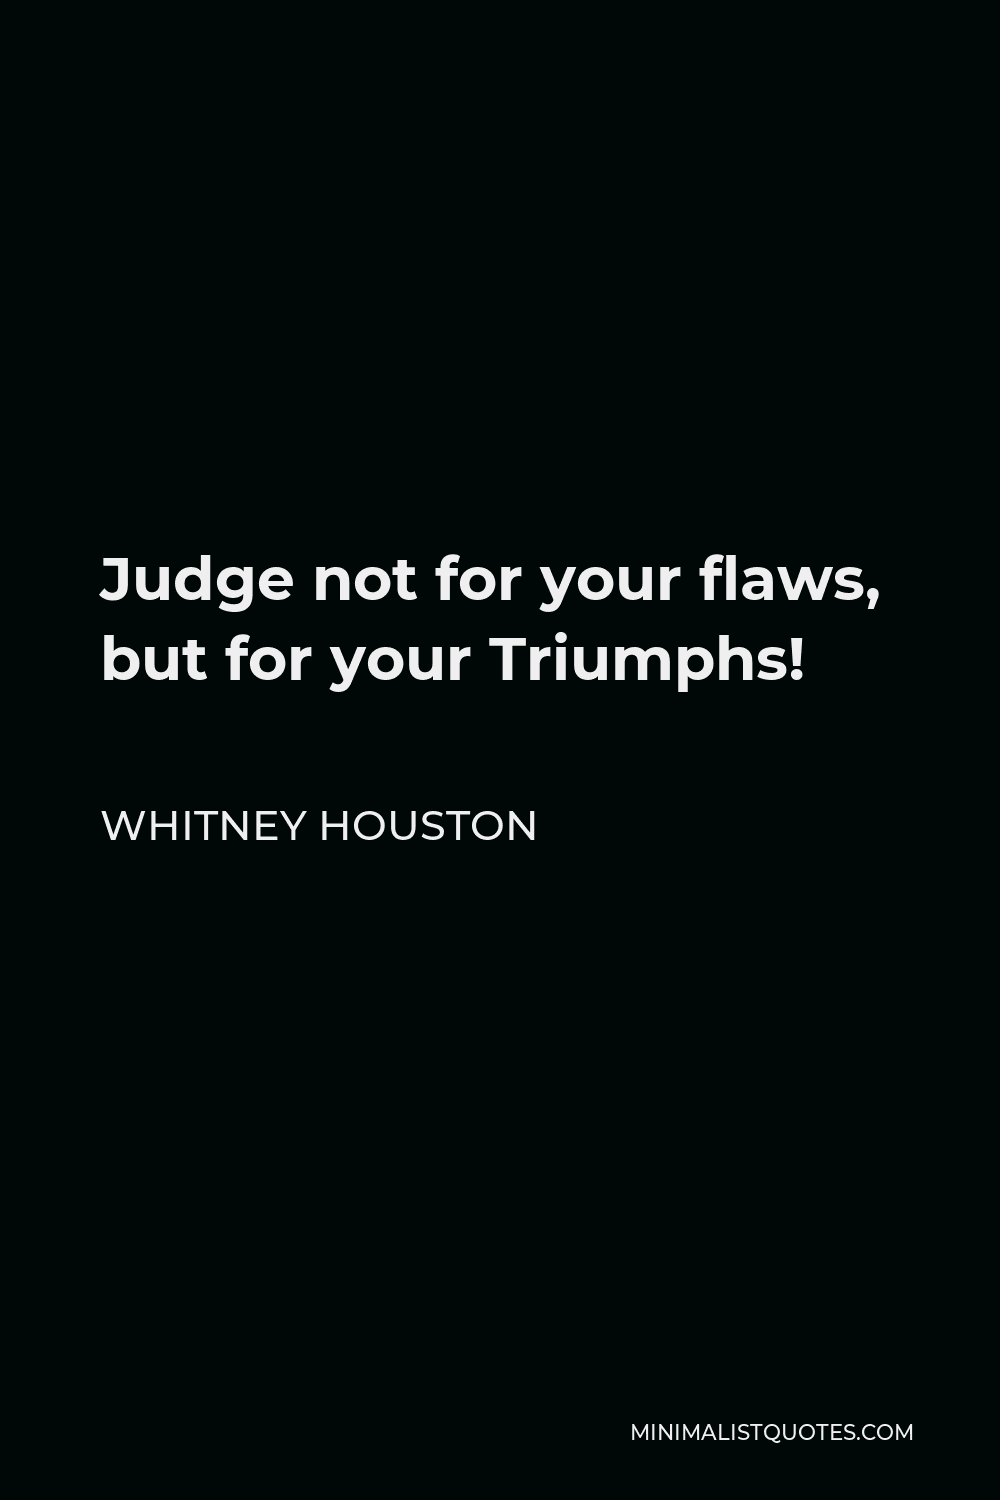 Whitney Houston Quote - Judge not for your flaws, but for your Triumphs!